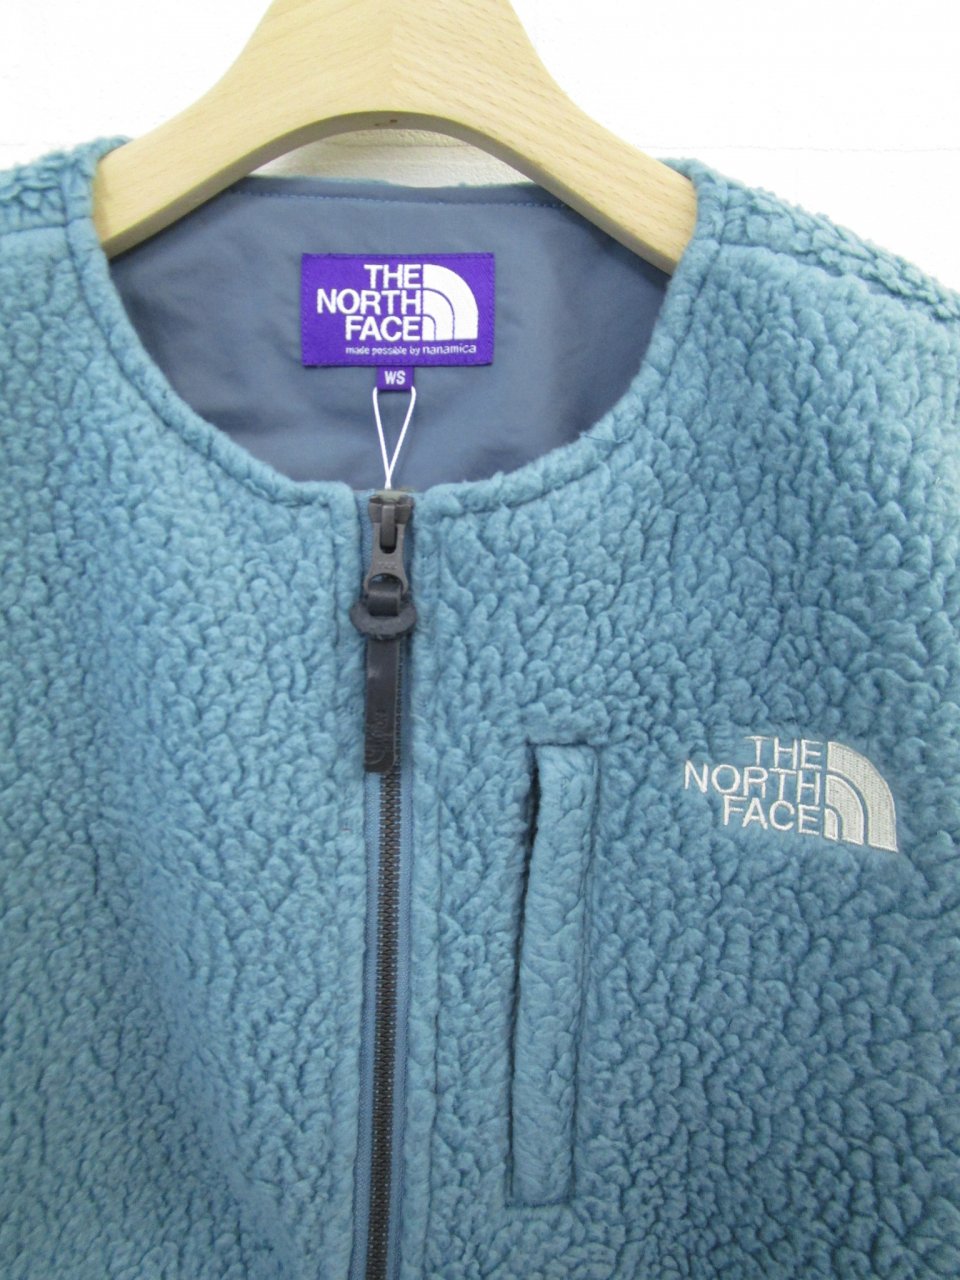 THE NORTH FACE - フィールドデナリコート - Sheth Online Store 